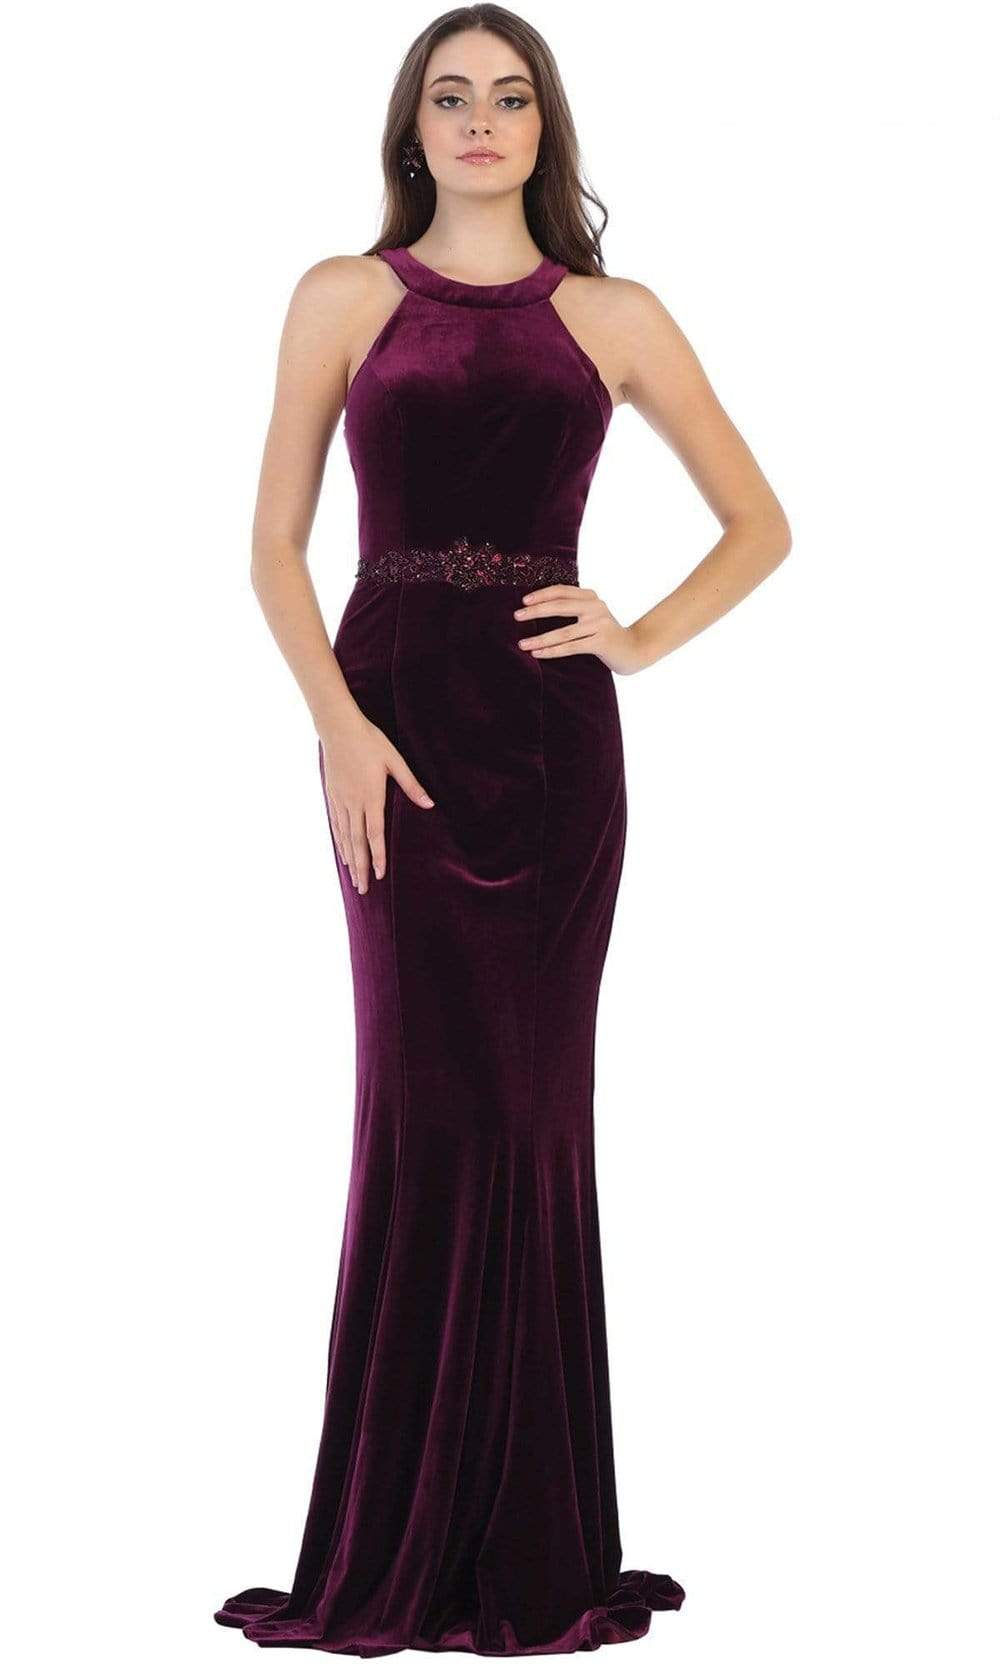 May Queen - RQ7652 Fitted Jewel Sheath Evening Dress